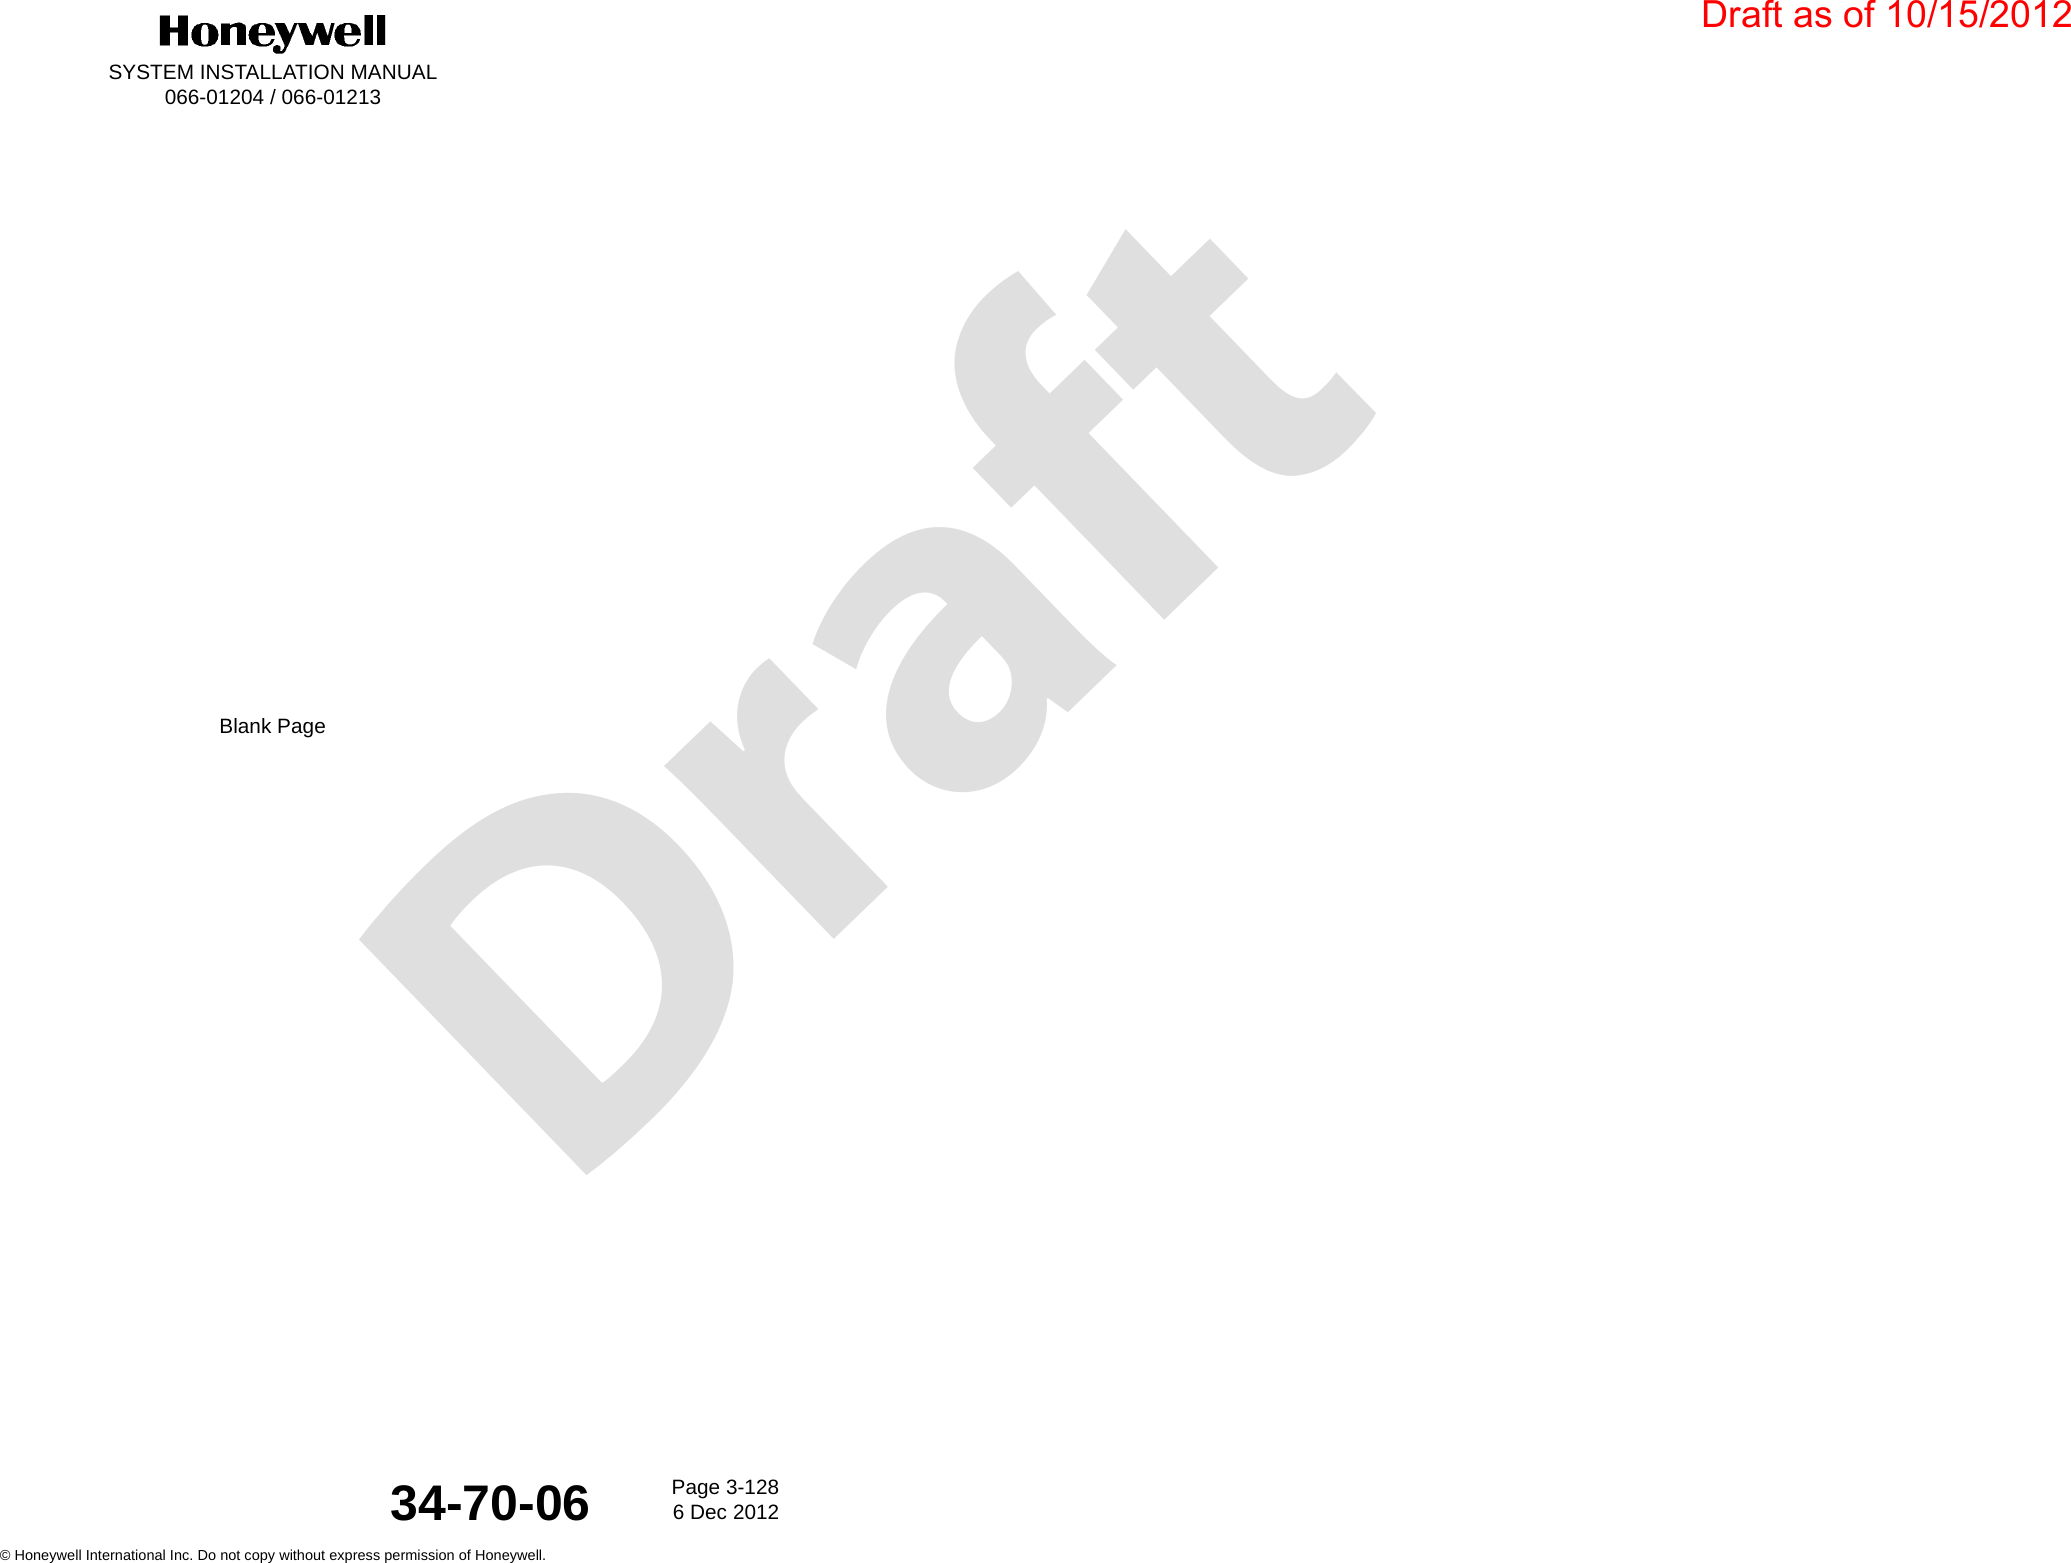 DraftSYSTEM INSTALLATION MANUAL066-01204 / 066-01213Page 3-1286 Dec 2012© Honeywell International Inc. Do not copy without express permission of Honeywell.34-70-06Blank PageDraft as of 10/15/2012